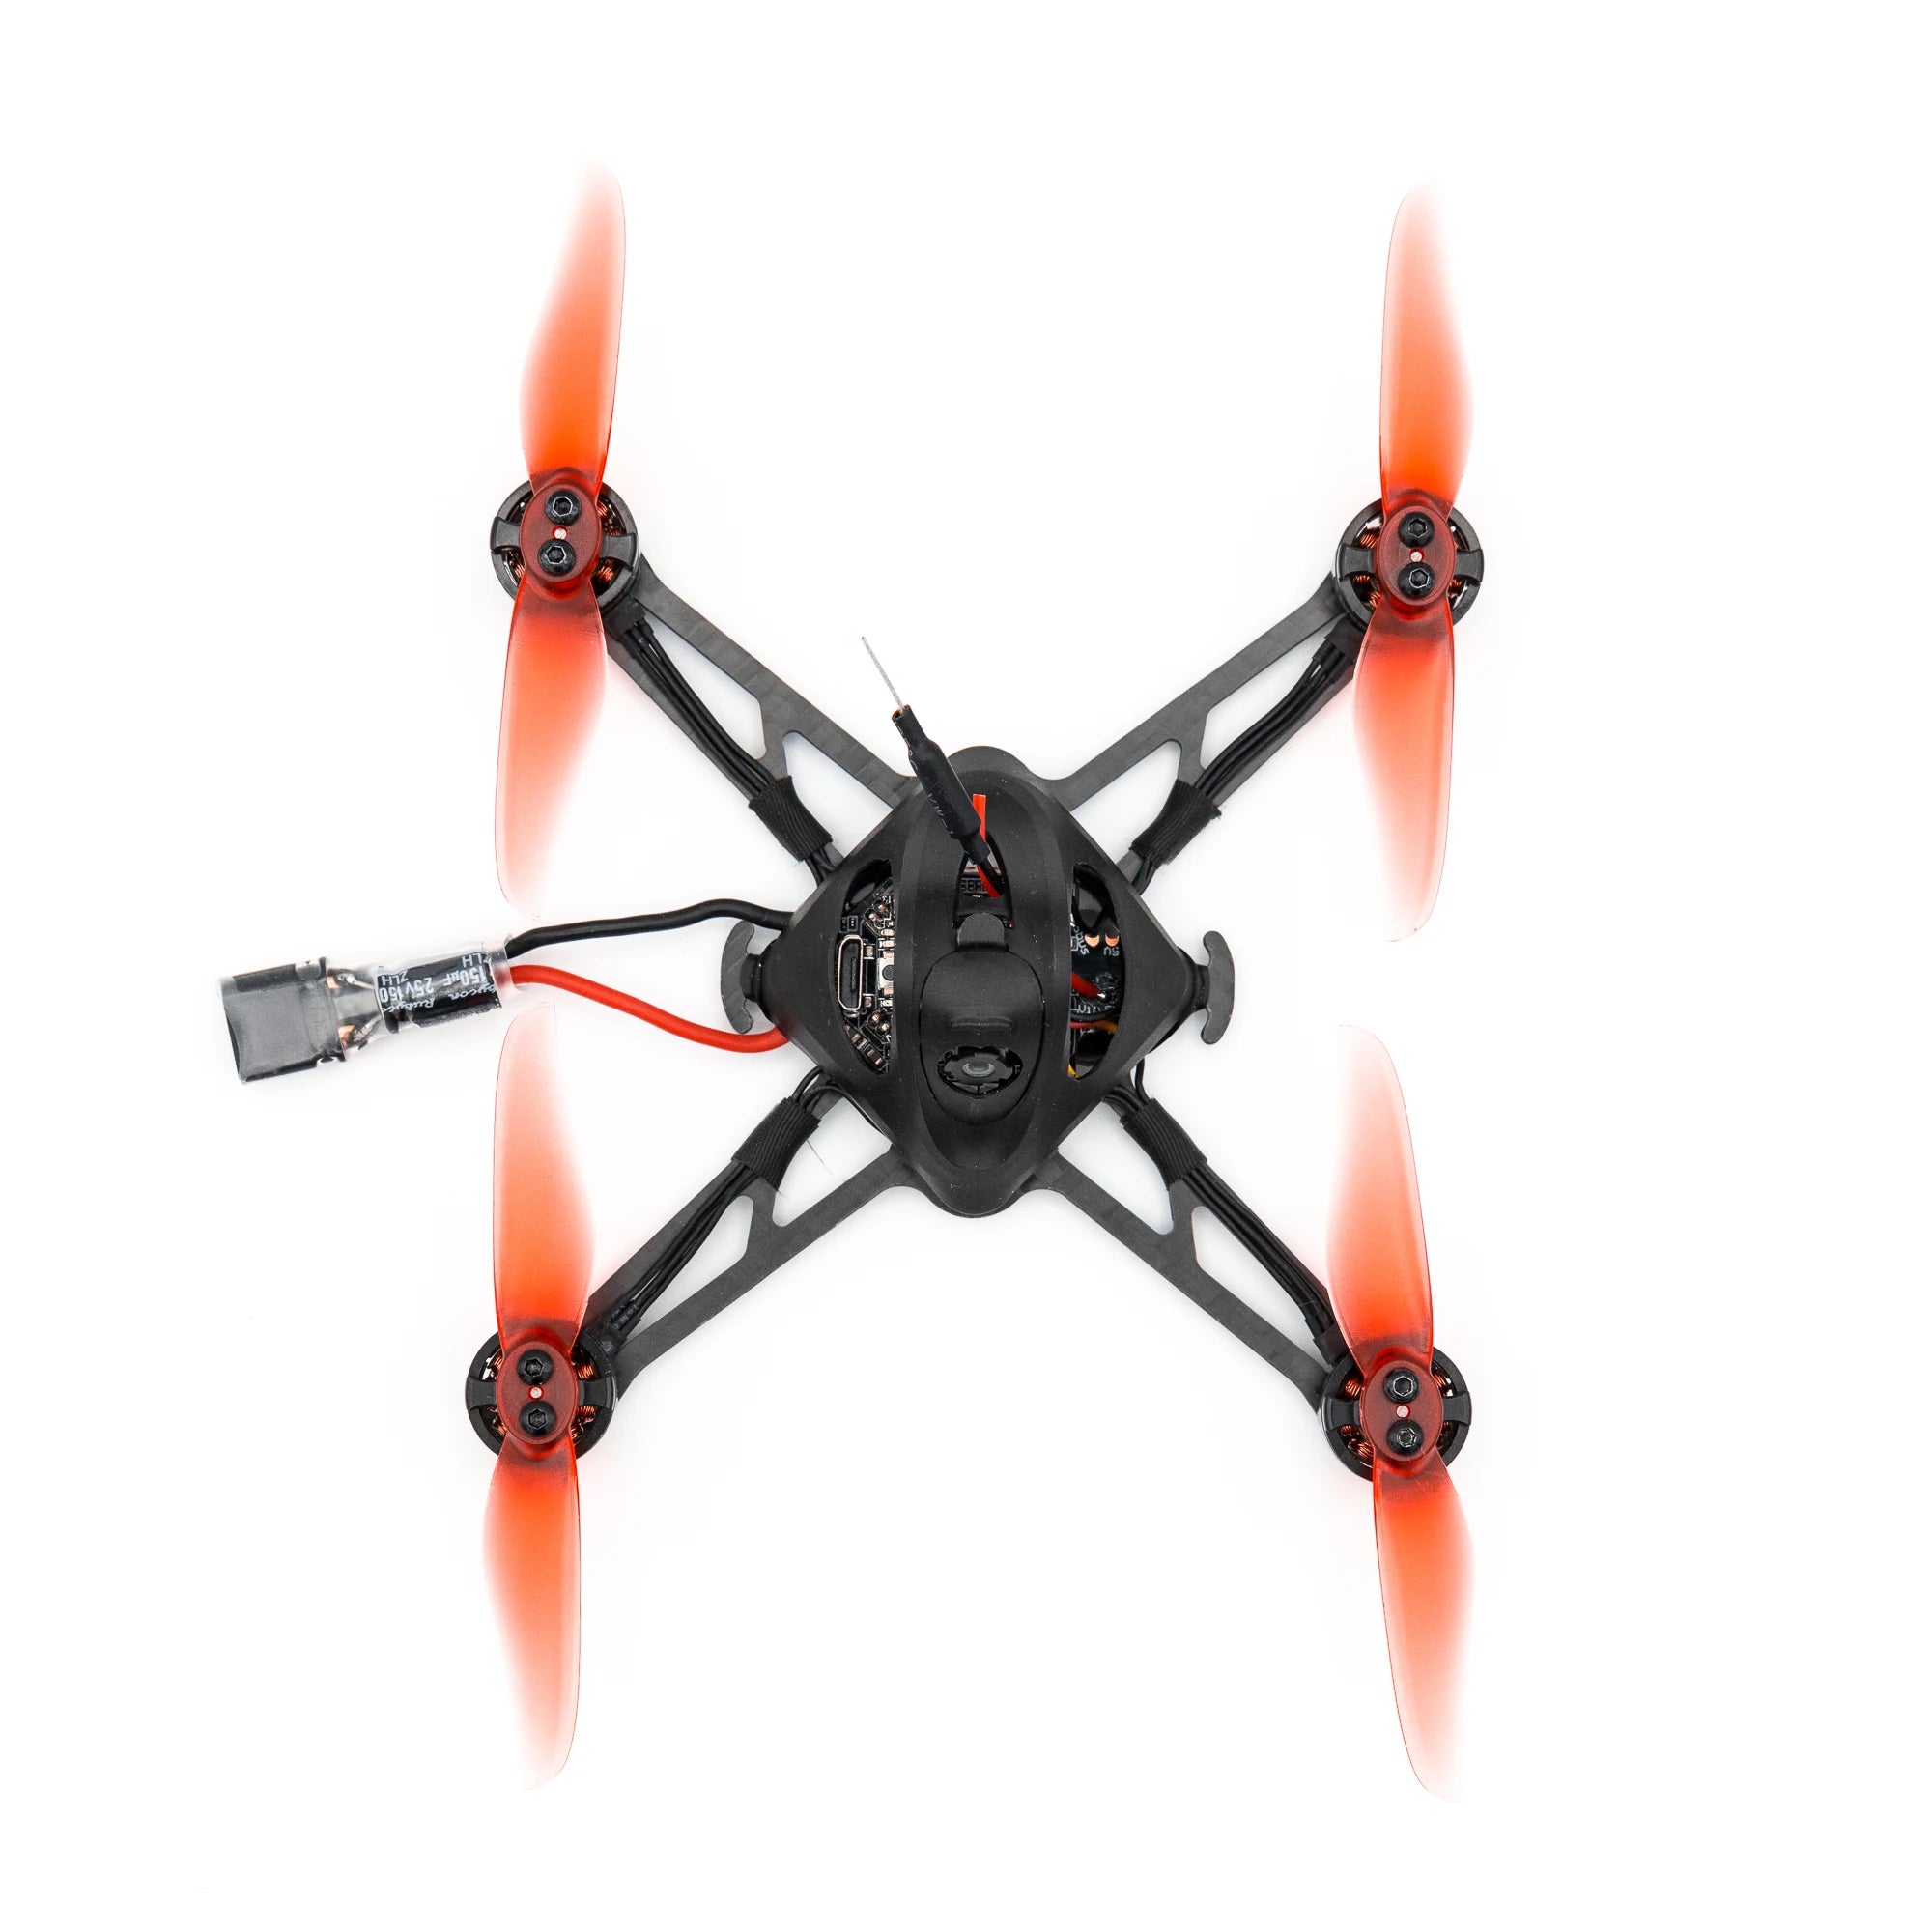 EMAX Nanohawk X, Be sure to have extra batteries on hand to extend your flight time 